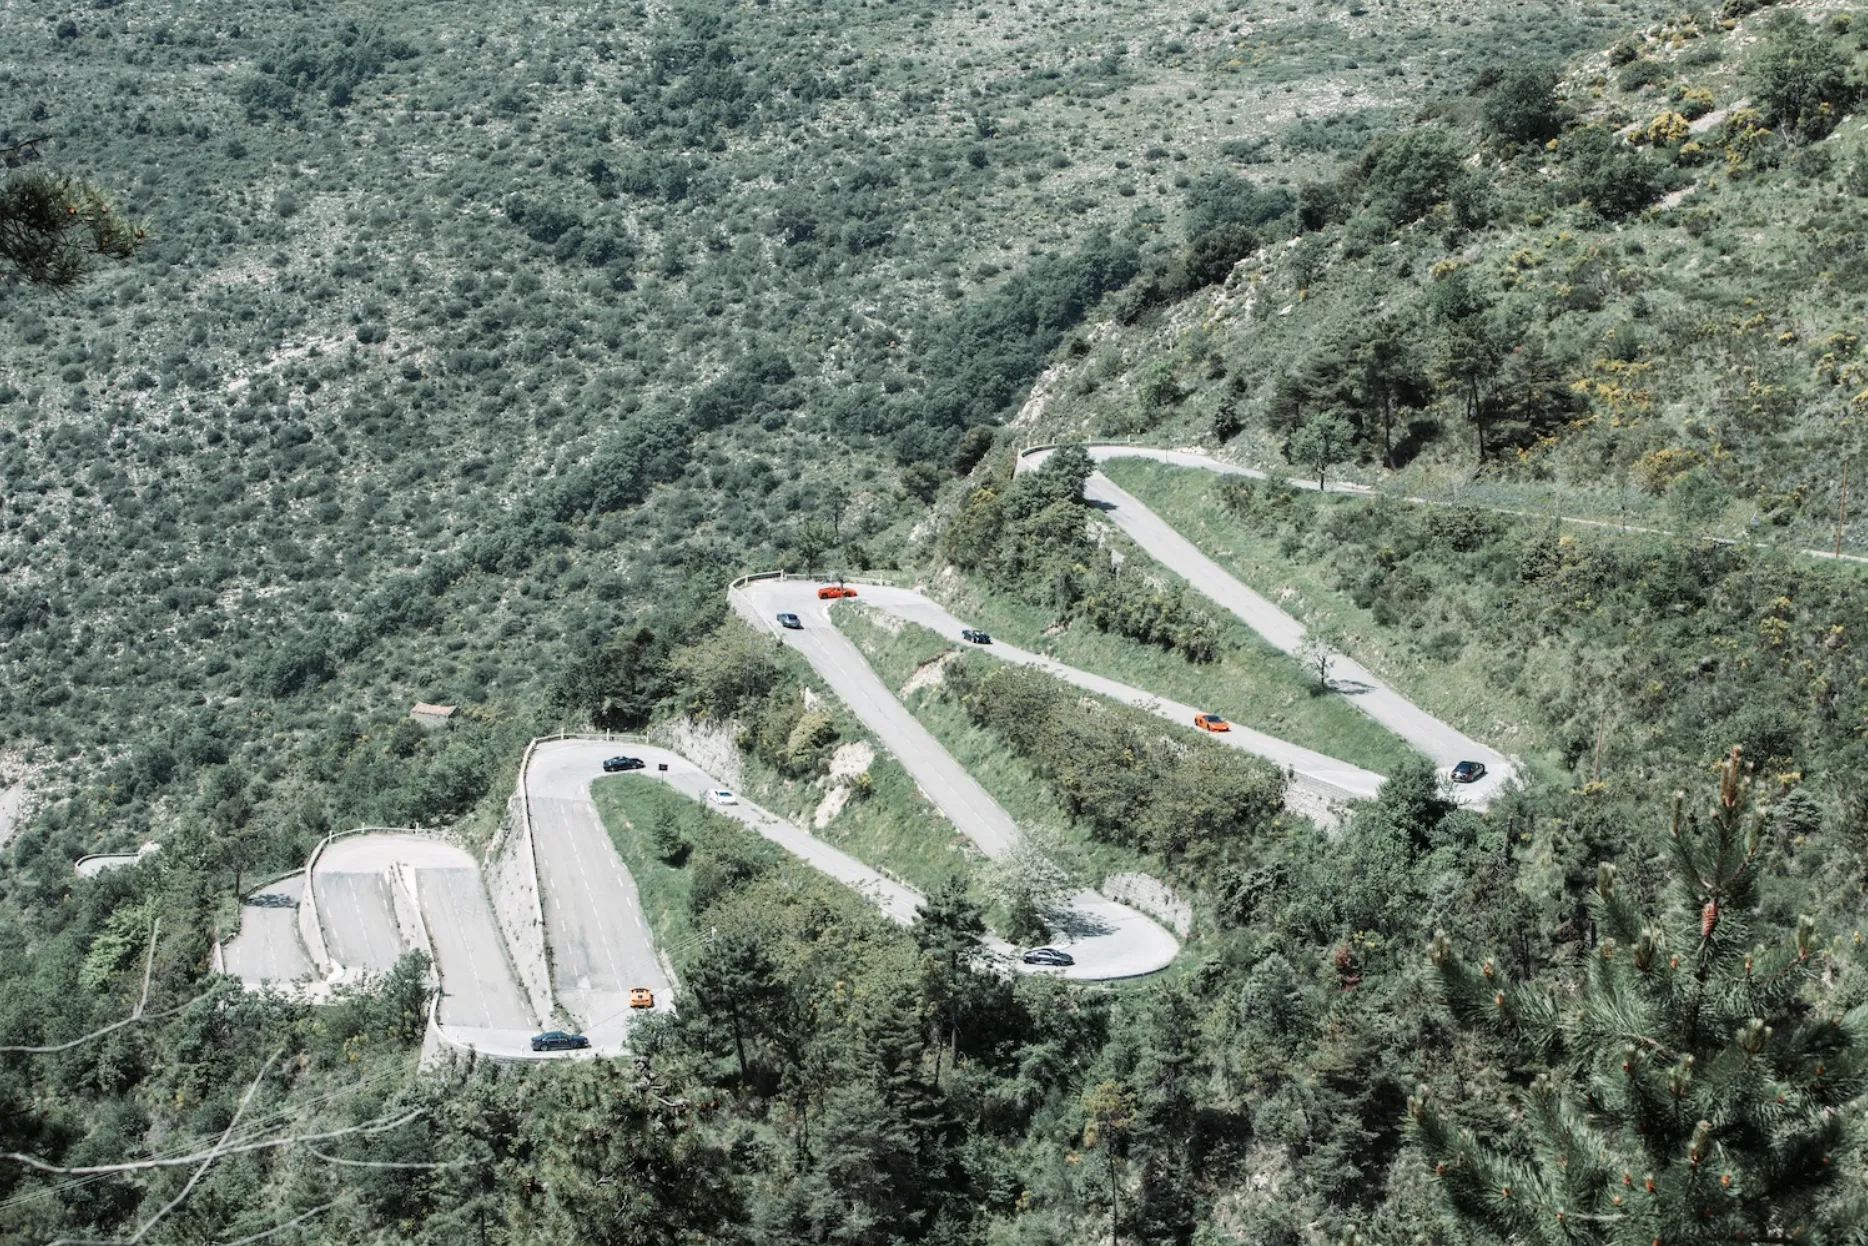 supercars climb up a hill with a series of hairpin turns on a clear day